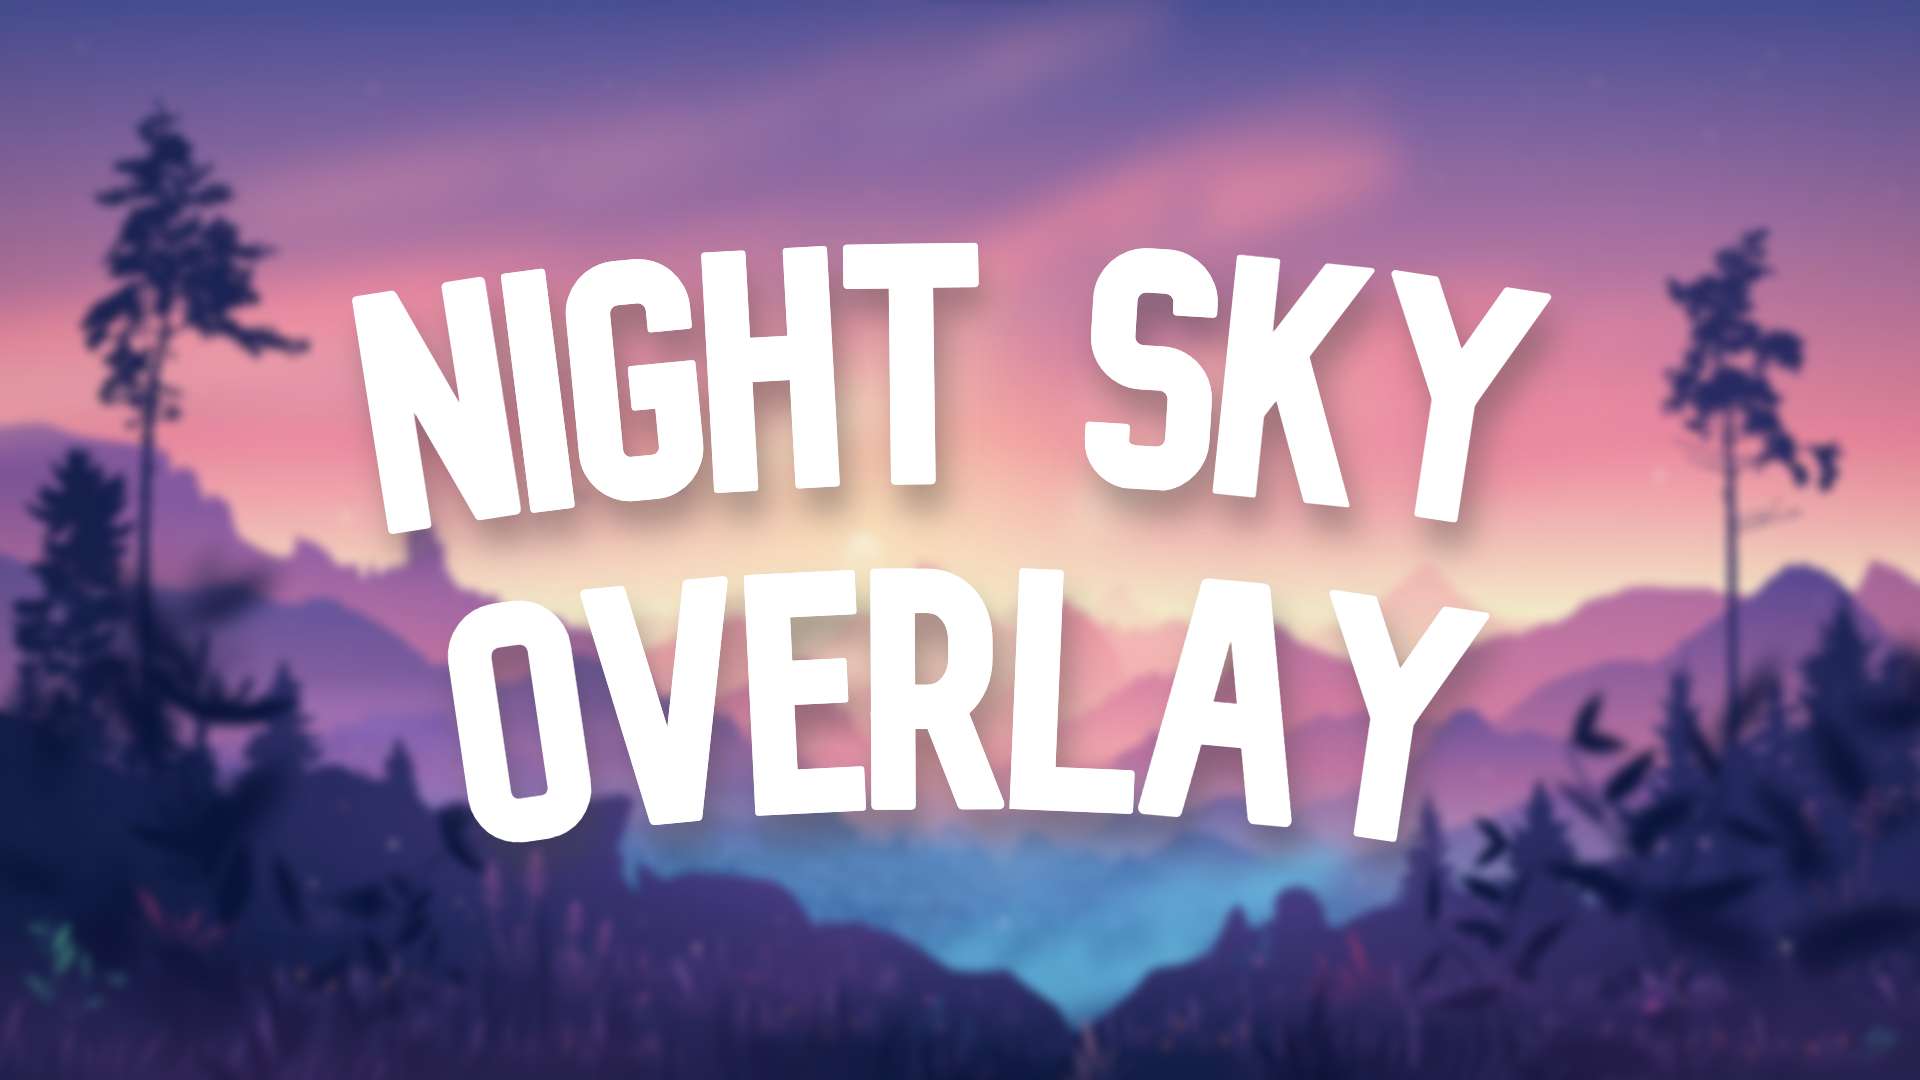 Gallery Banner for Night Sky Overlay #1 on PvPRP